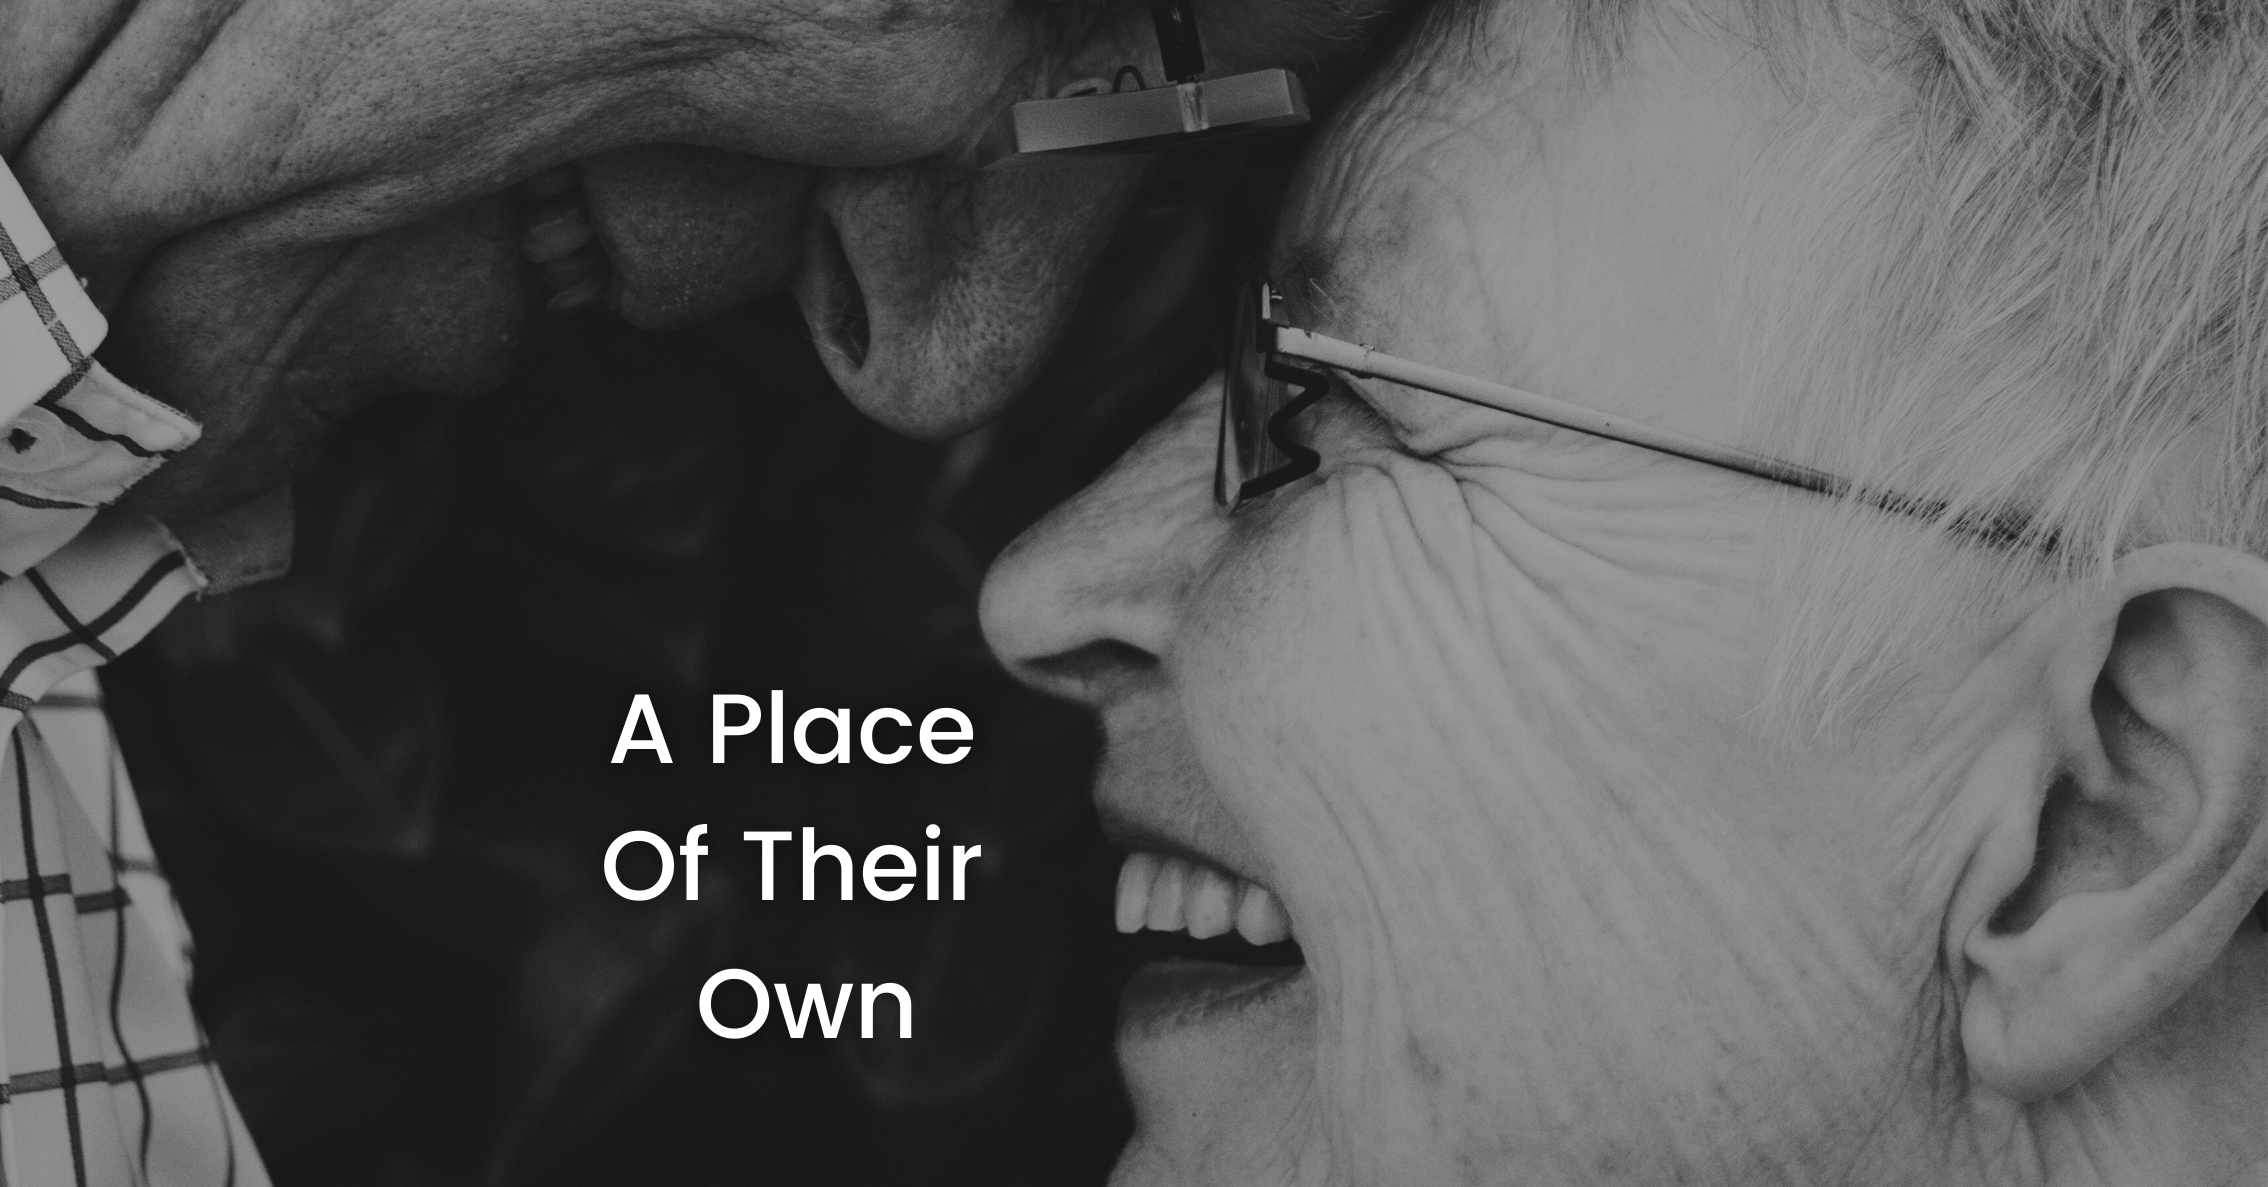 Featured image for “A place of their own”